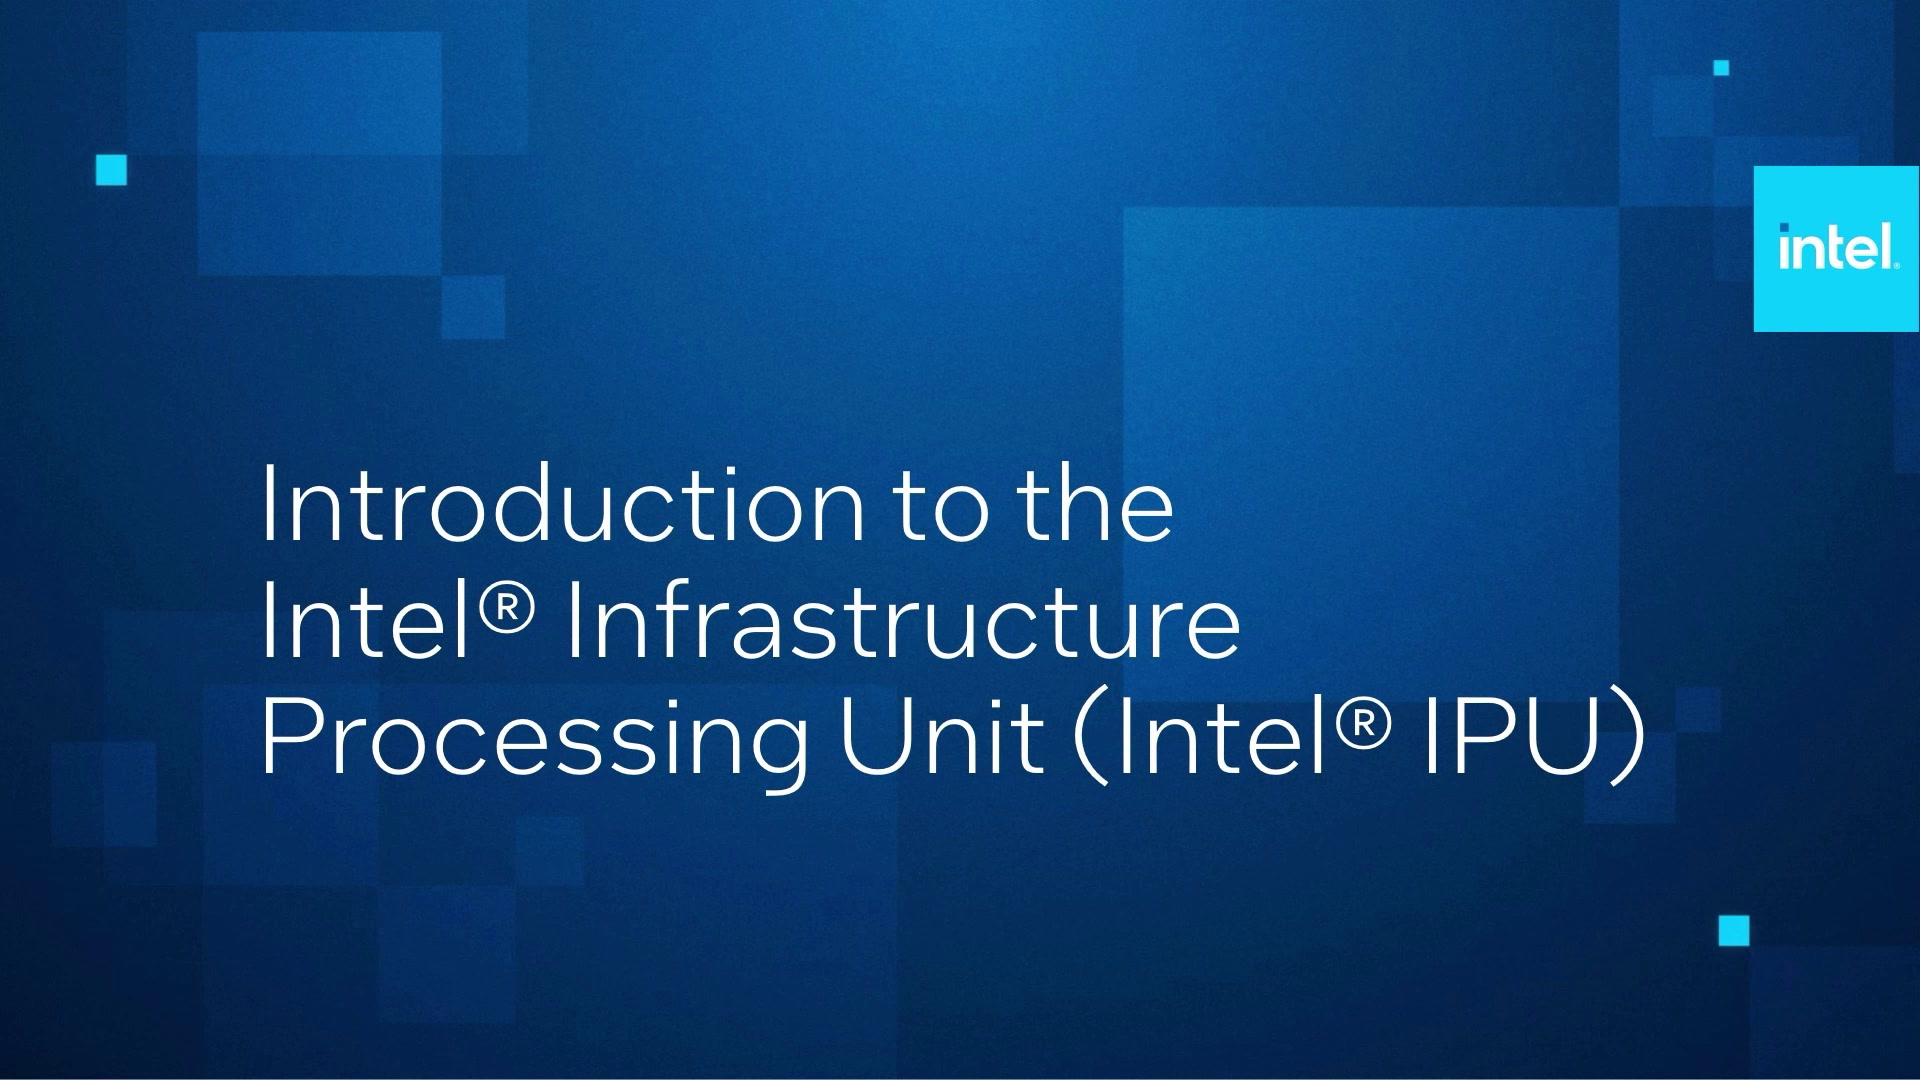 Introduction to the Intel® Infrastructure Processing Unit (Intel® IPU)